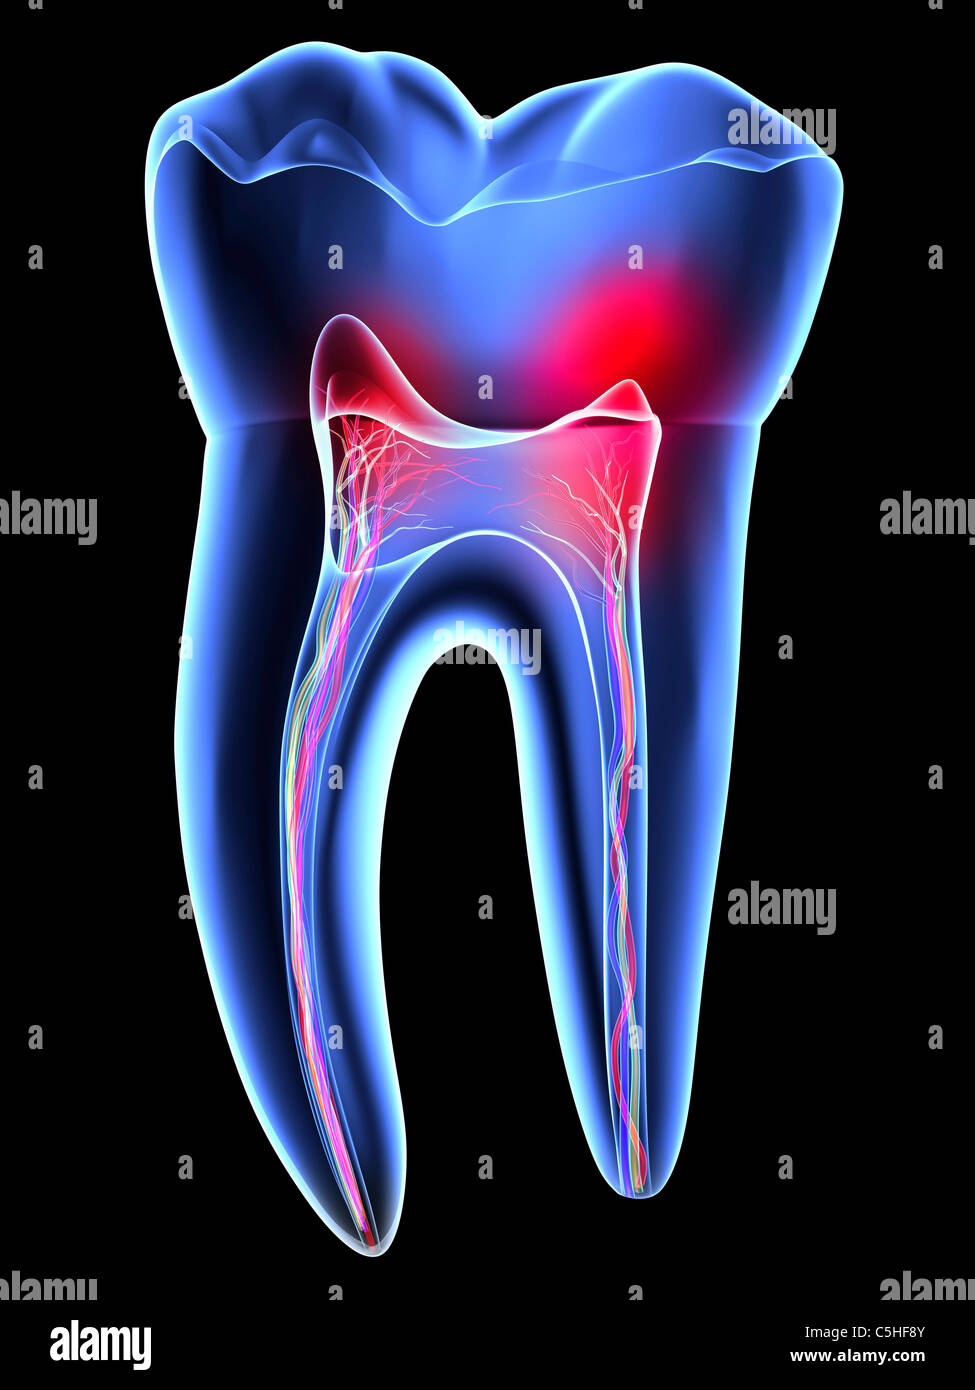 Tooth pain, toothache Stock Photo